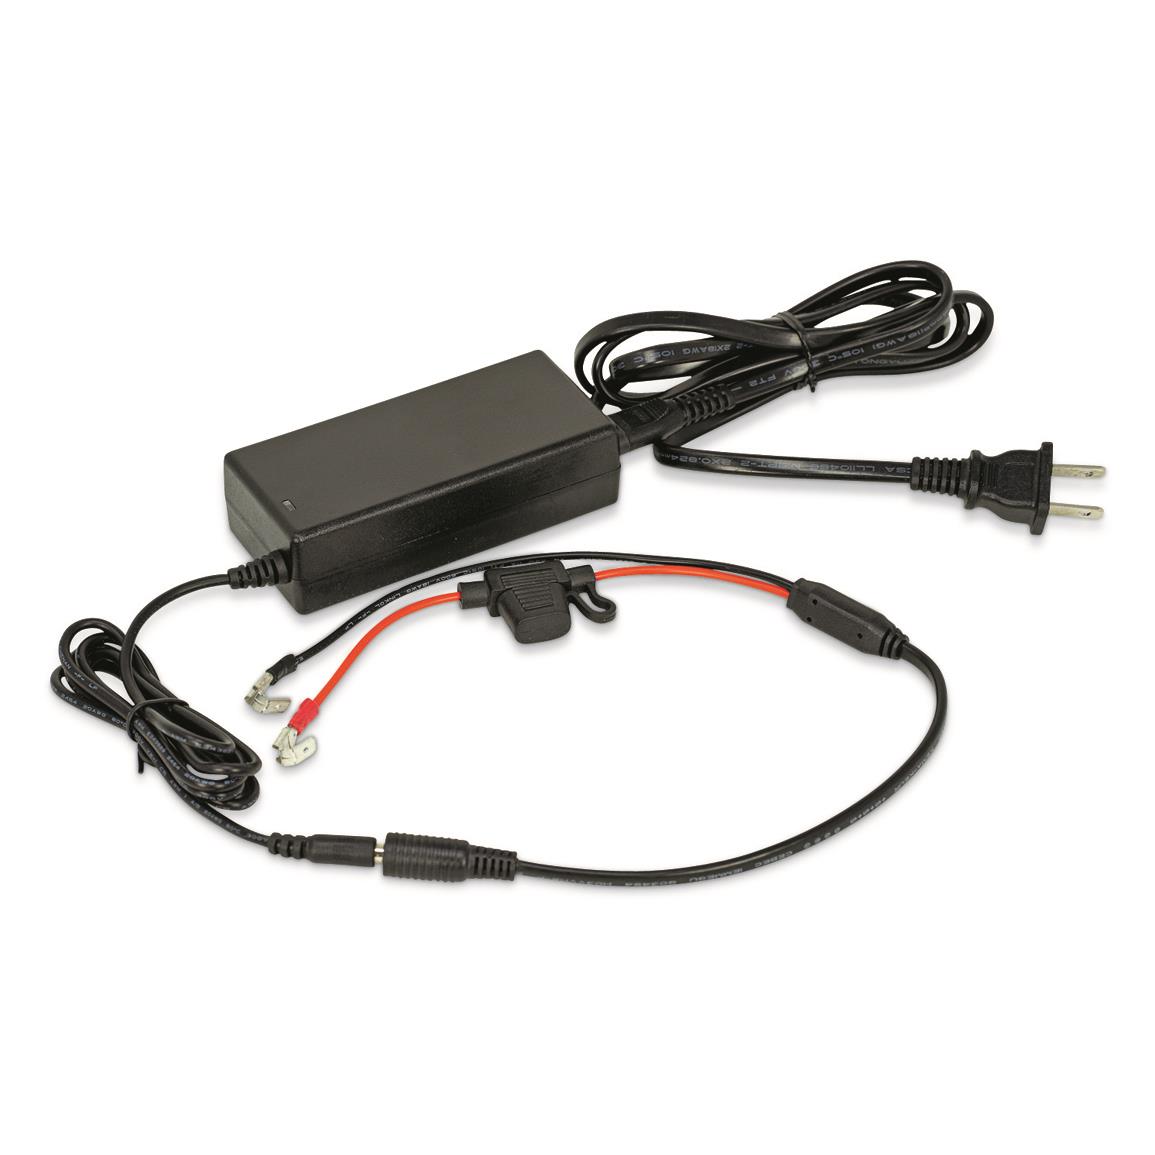 MarCum Mite 12V 3A Lithium Ion Battery Charger with Wiring Harness